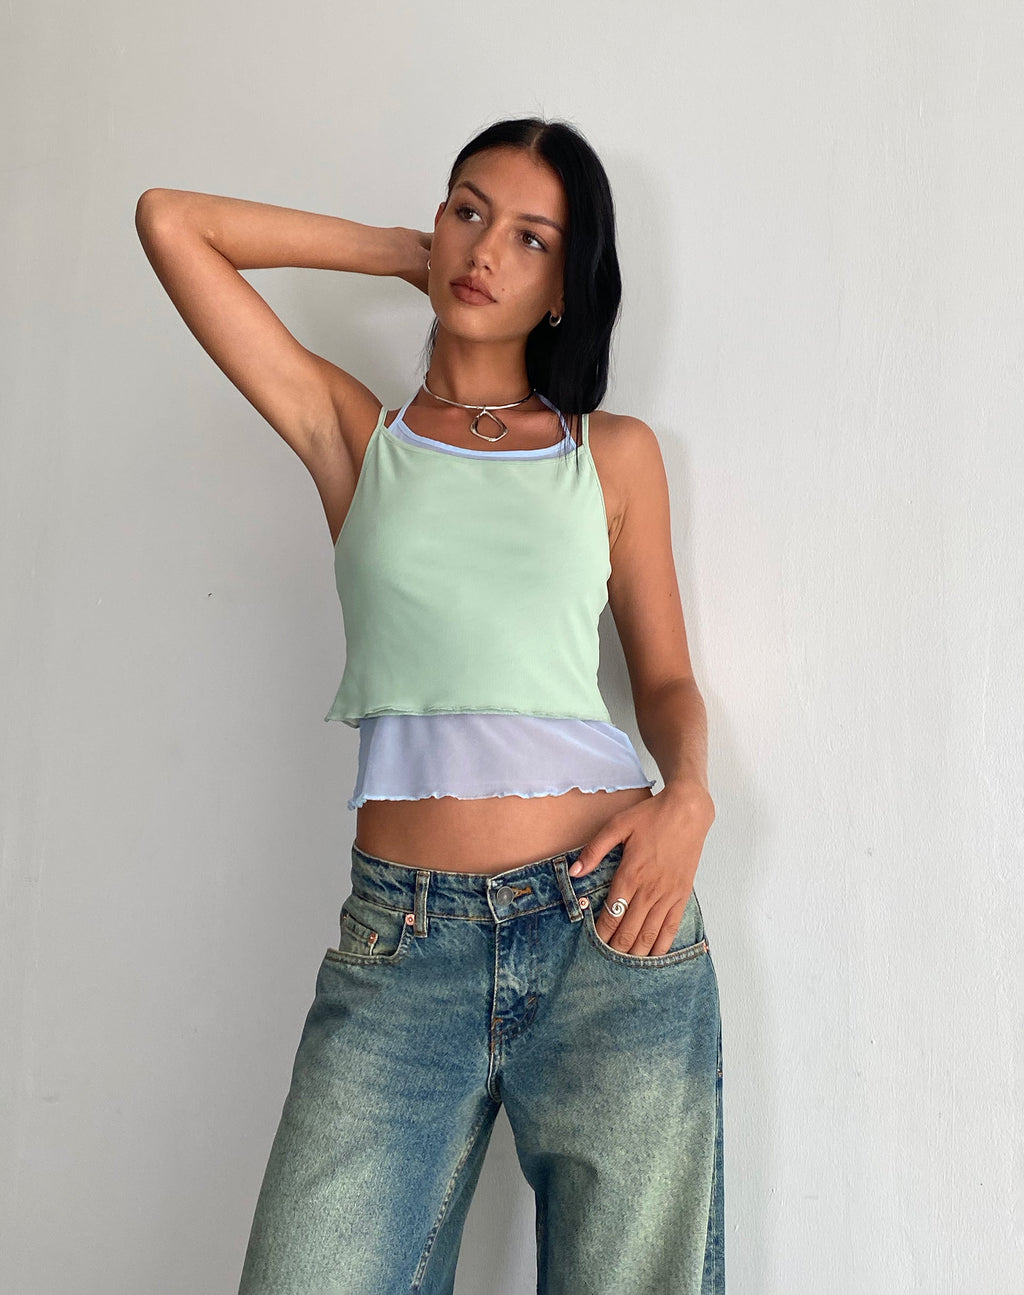 Sapphi Double Layered Cami Top in Frost Blue and Sage Green